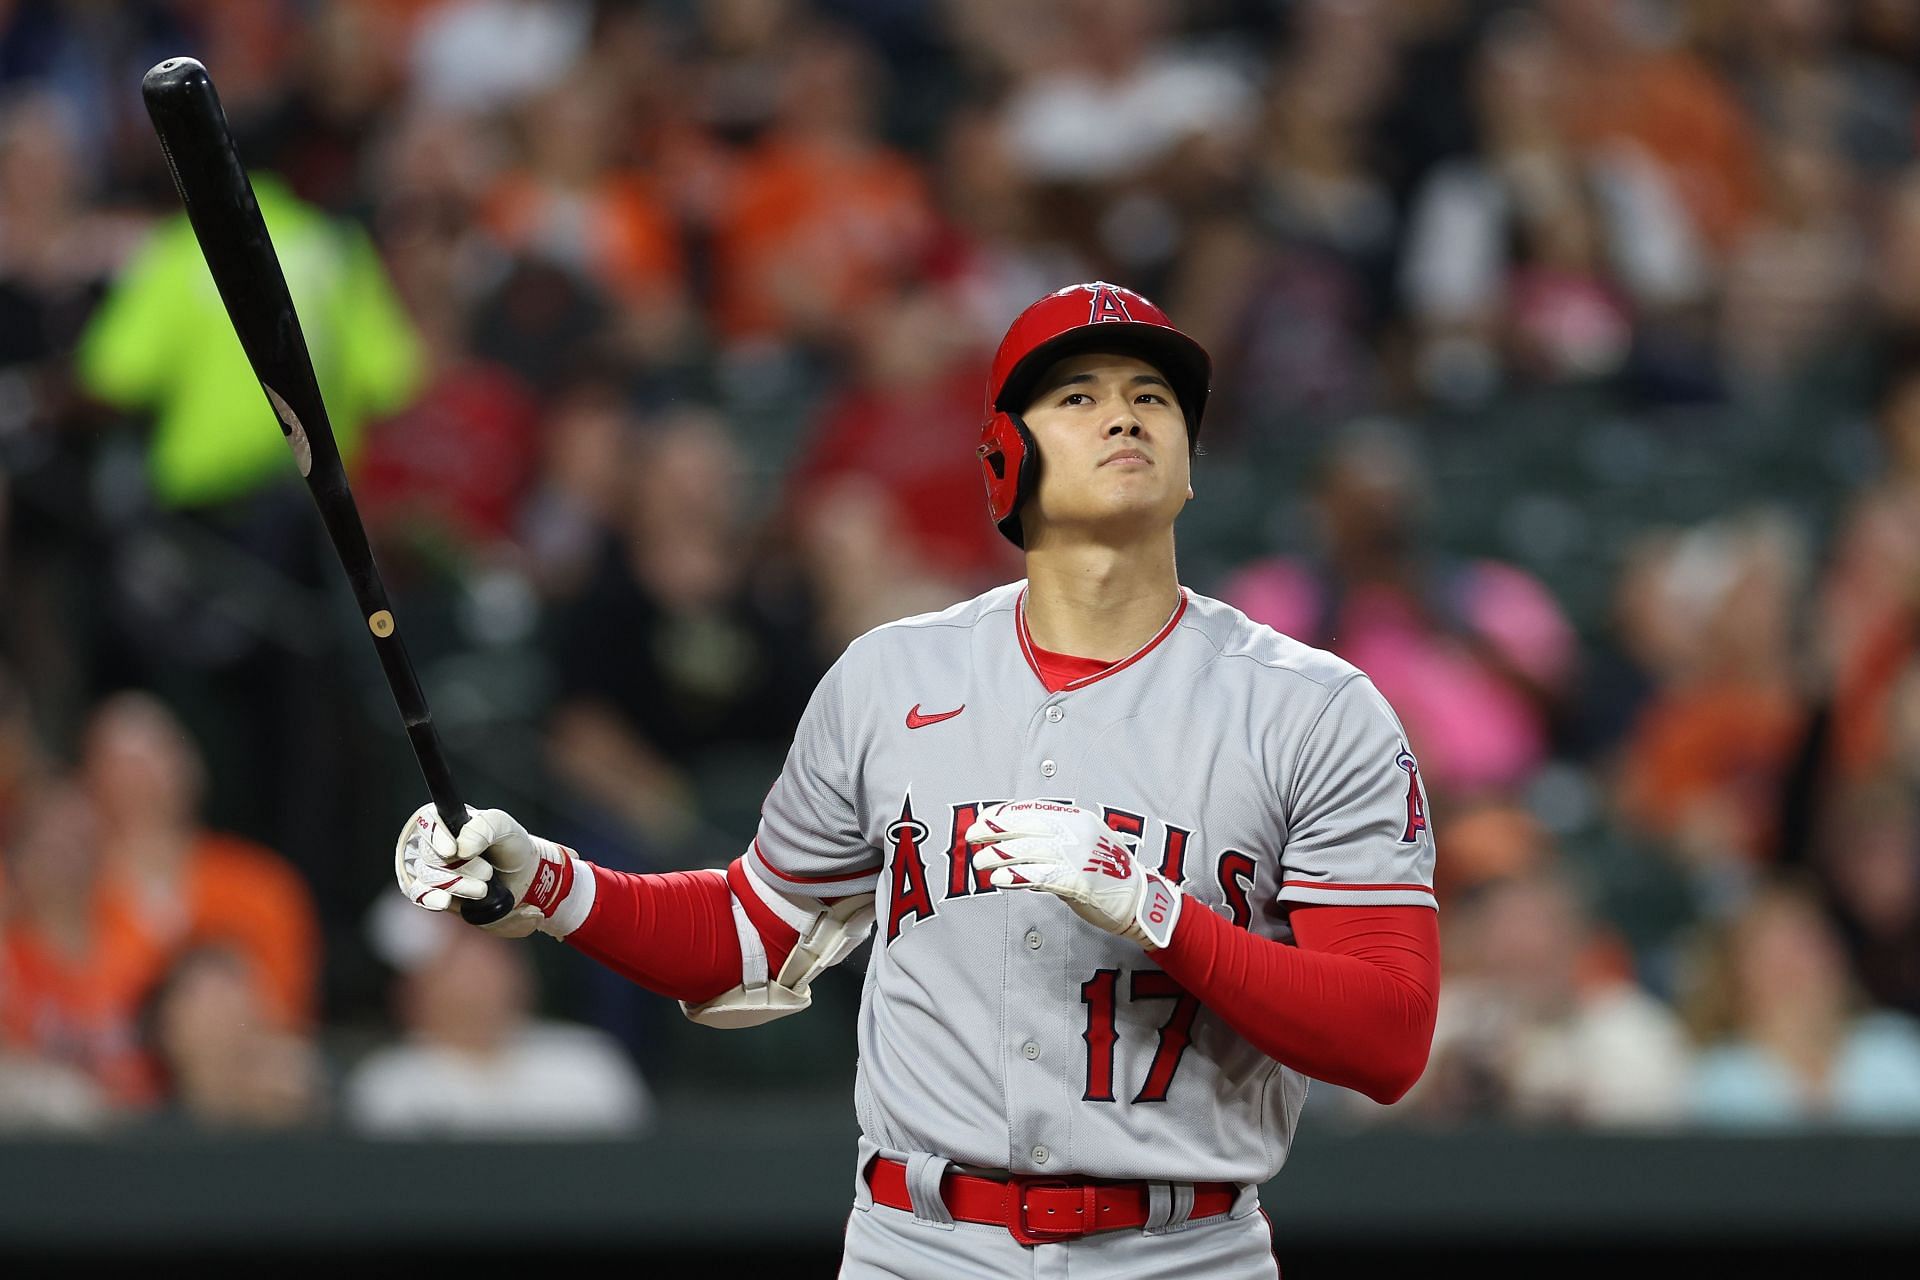 Is Shohei Ohtani better than Babe Ruth?